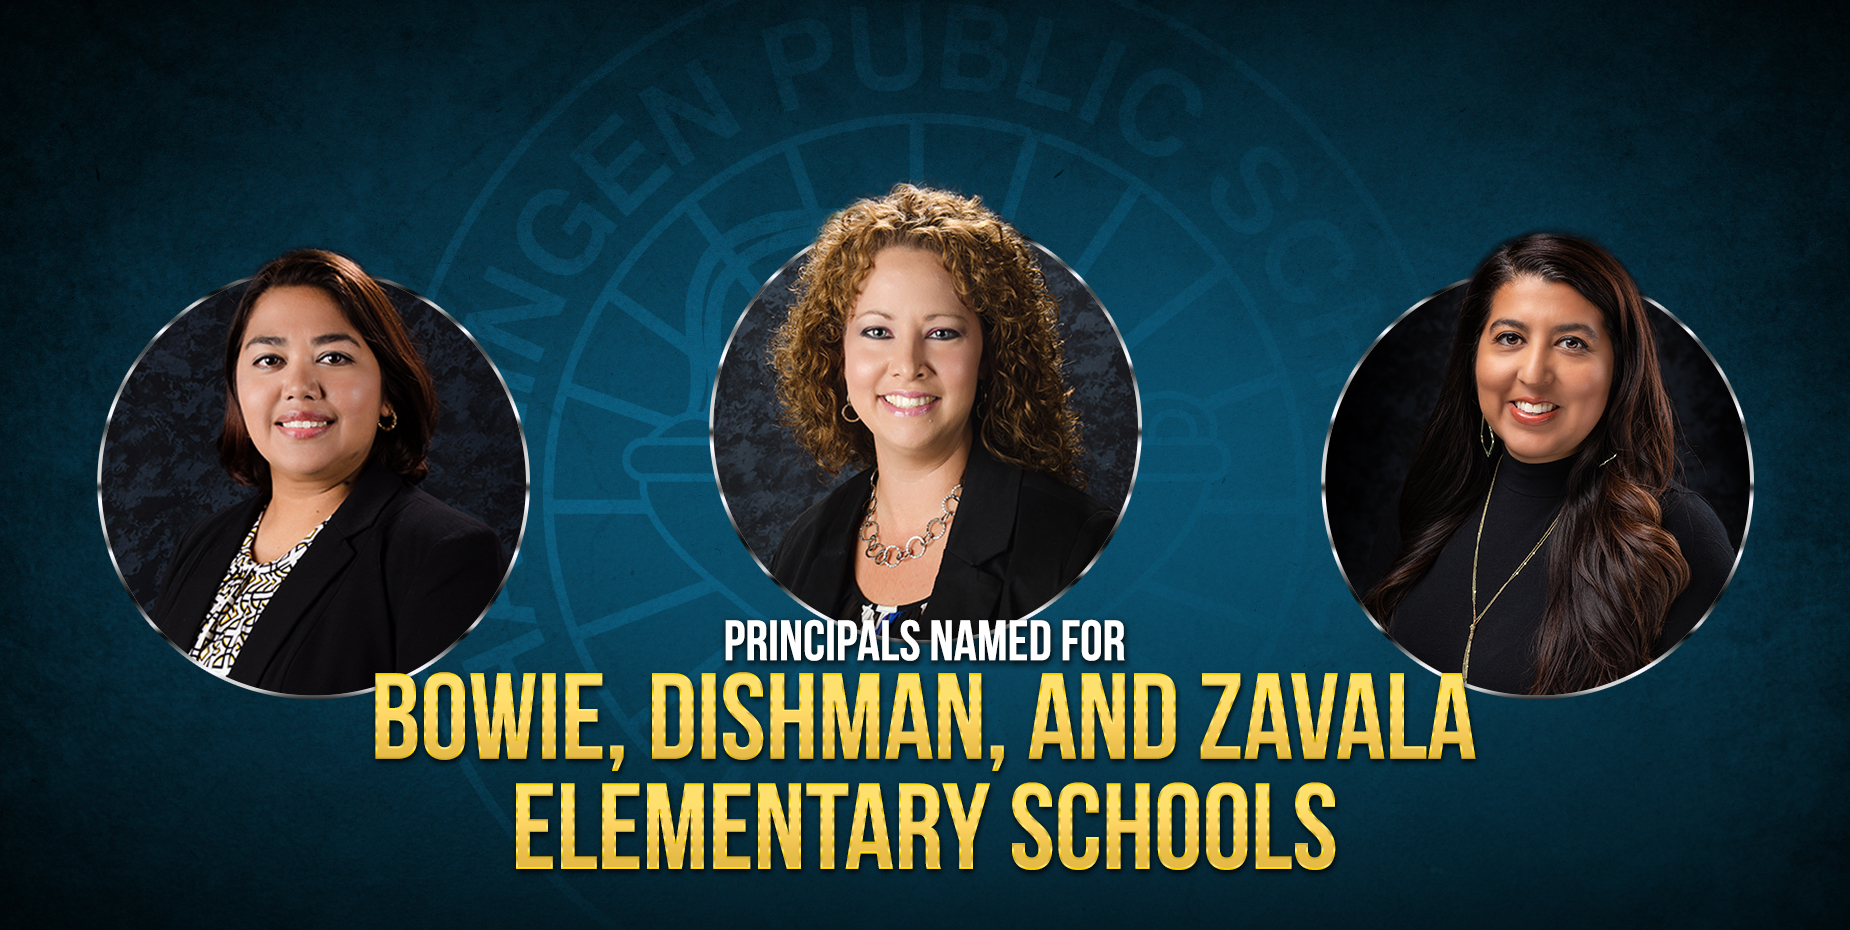 Principals named for Bowie, Dishman, and Zavala Elementary